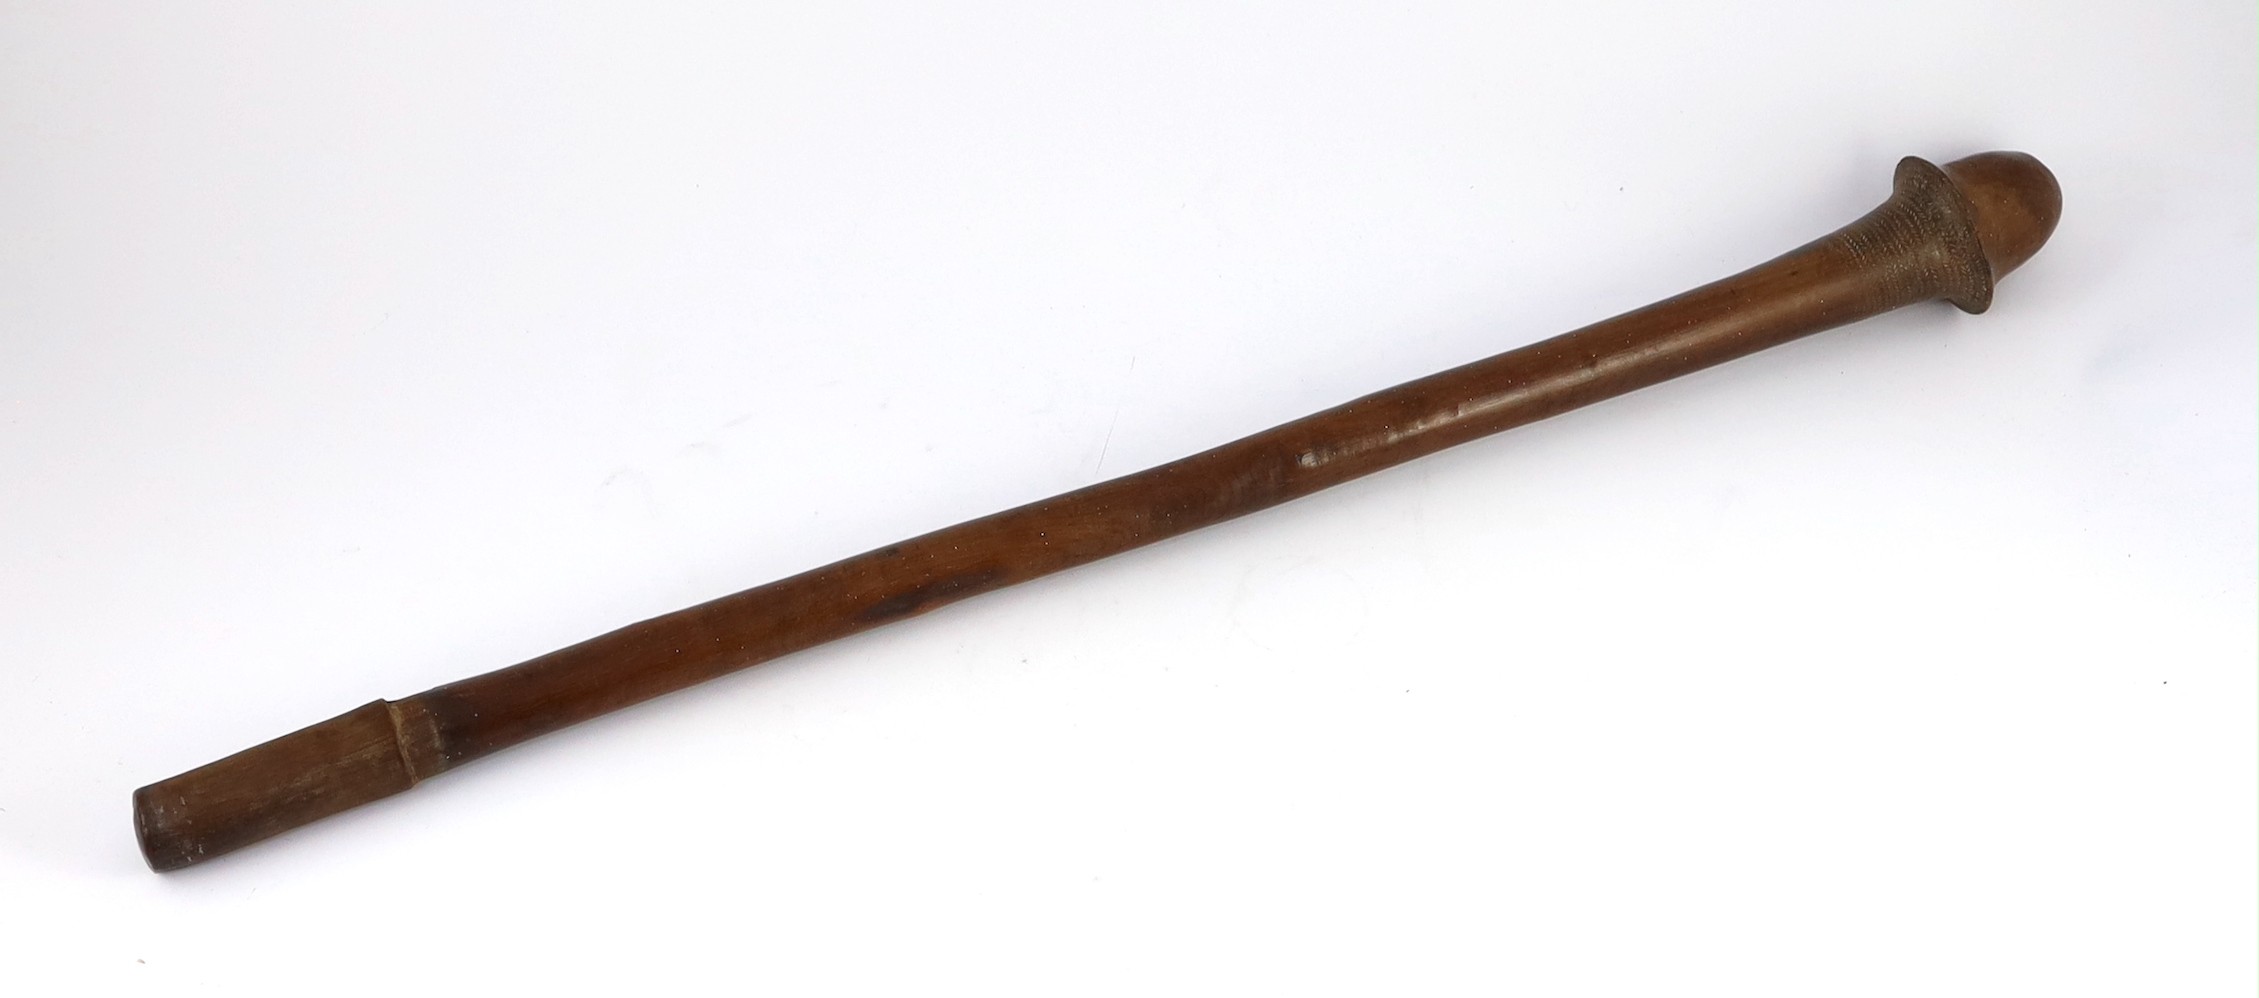 A South Sea Island hardwood war club, with chevron banded engraving beneath the head and unpolished handle, 79cm long